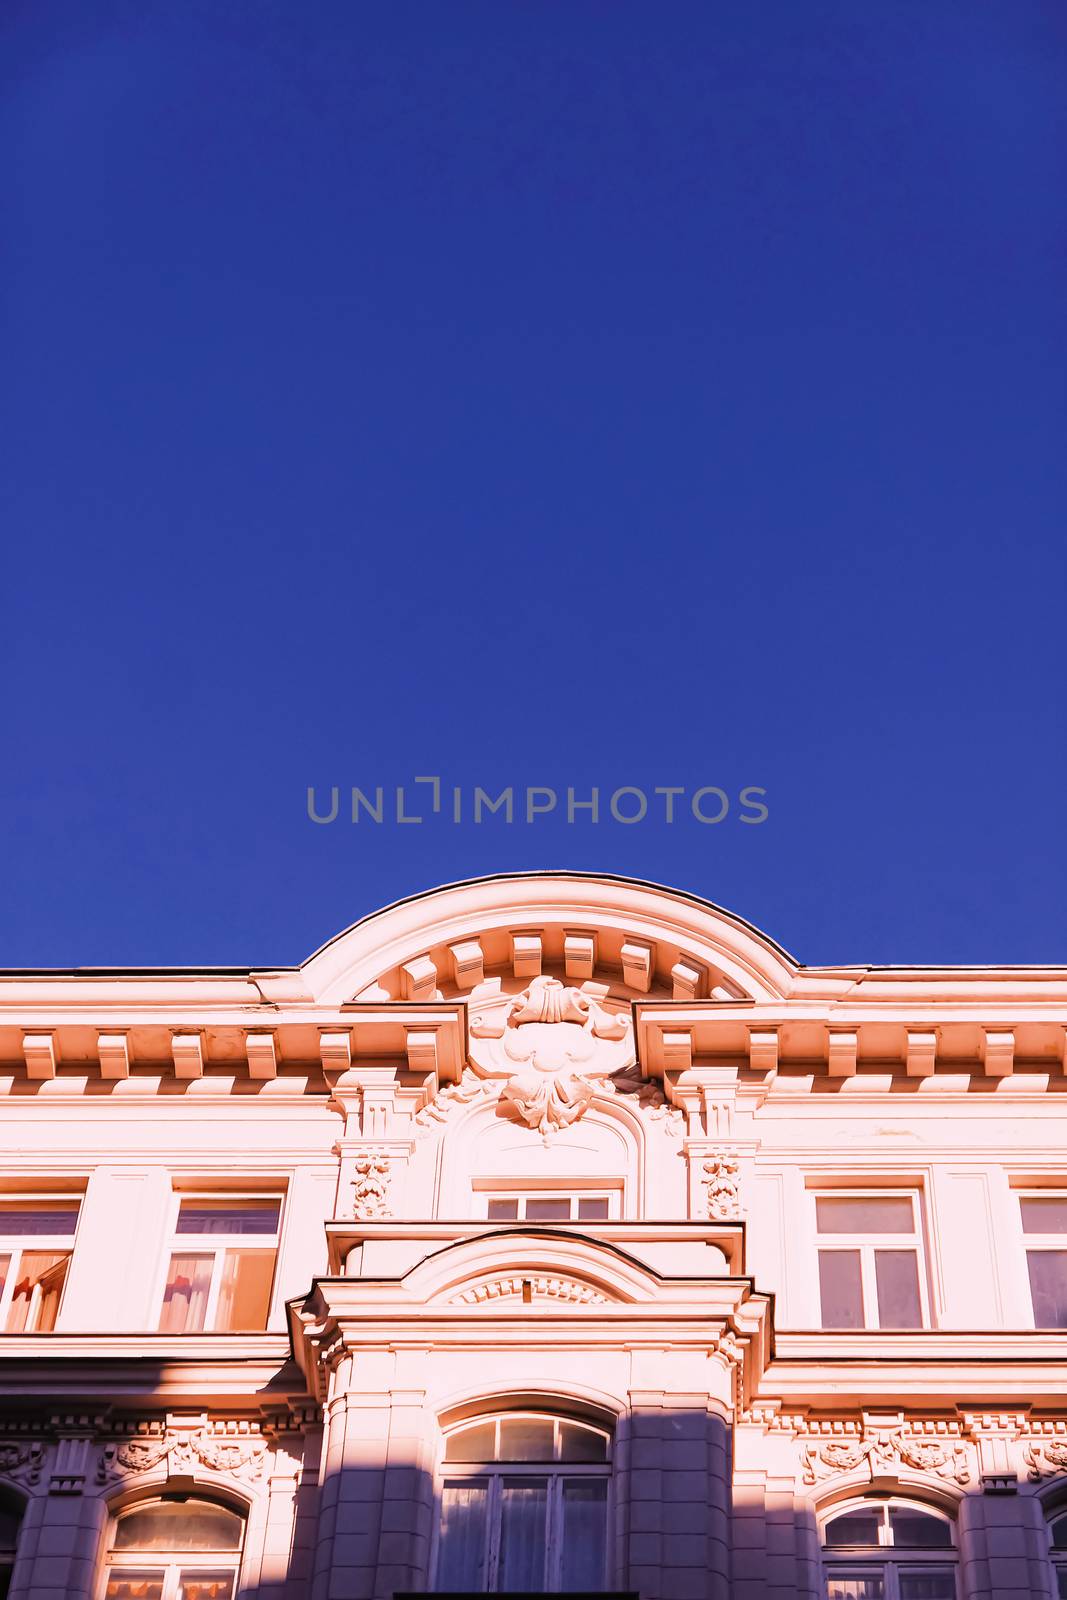 Exterior facade of classic building in the European city, architecture and design by Anneleven